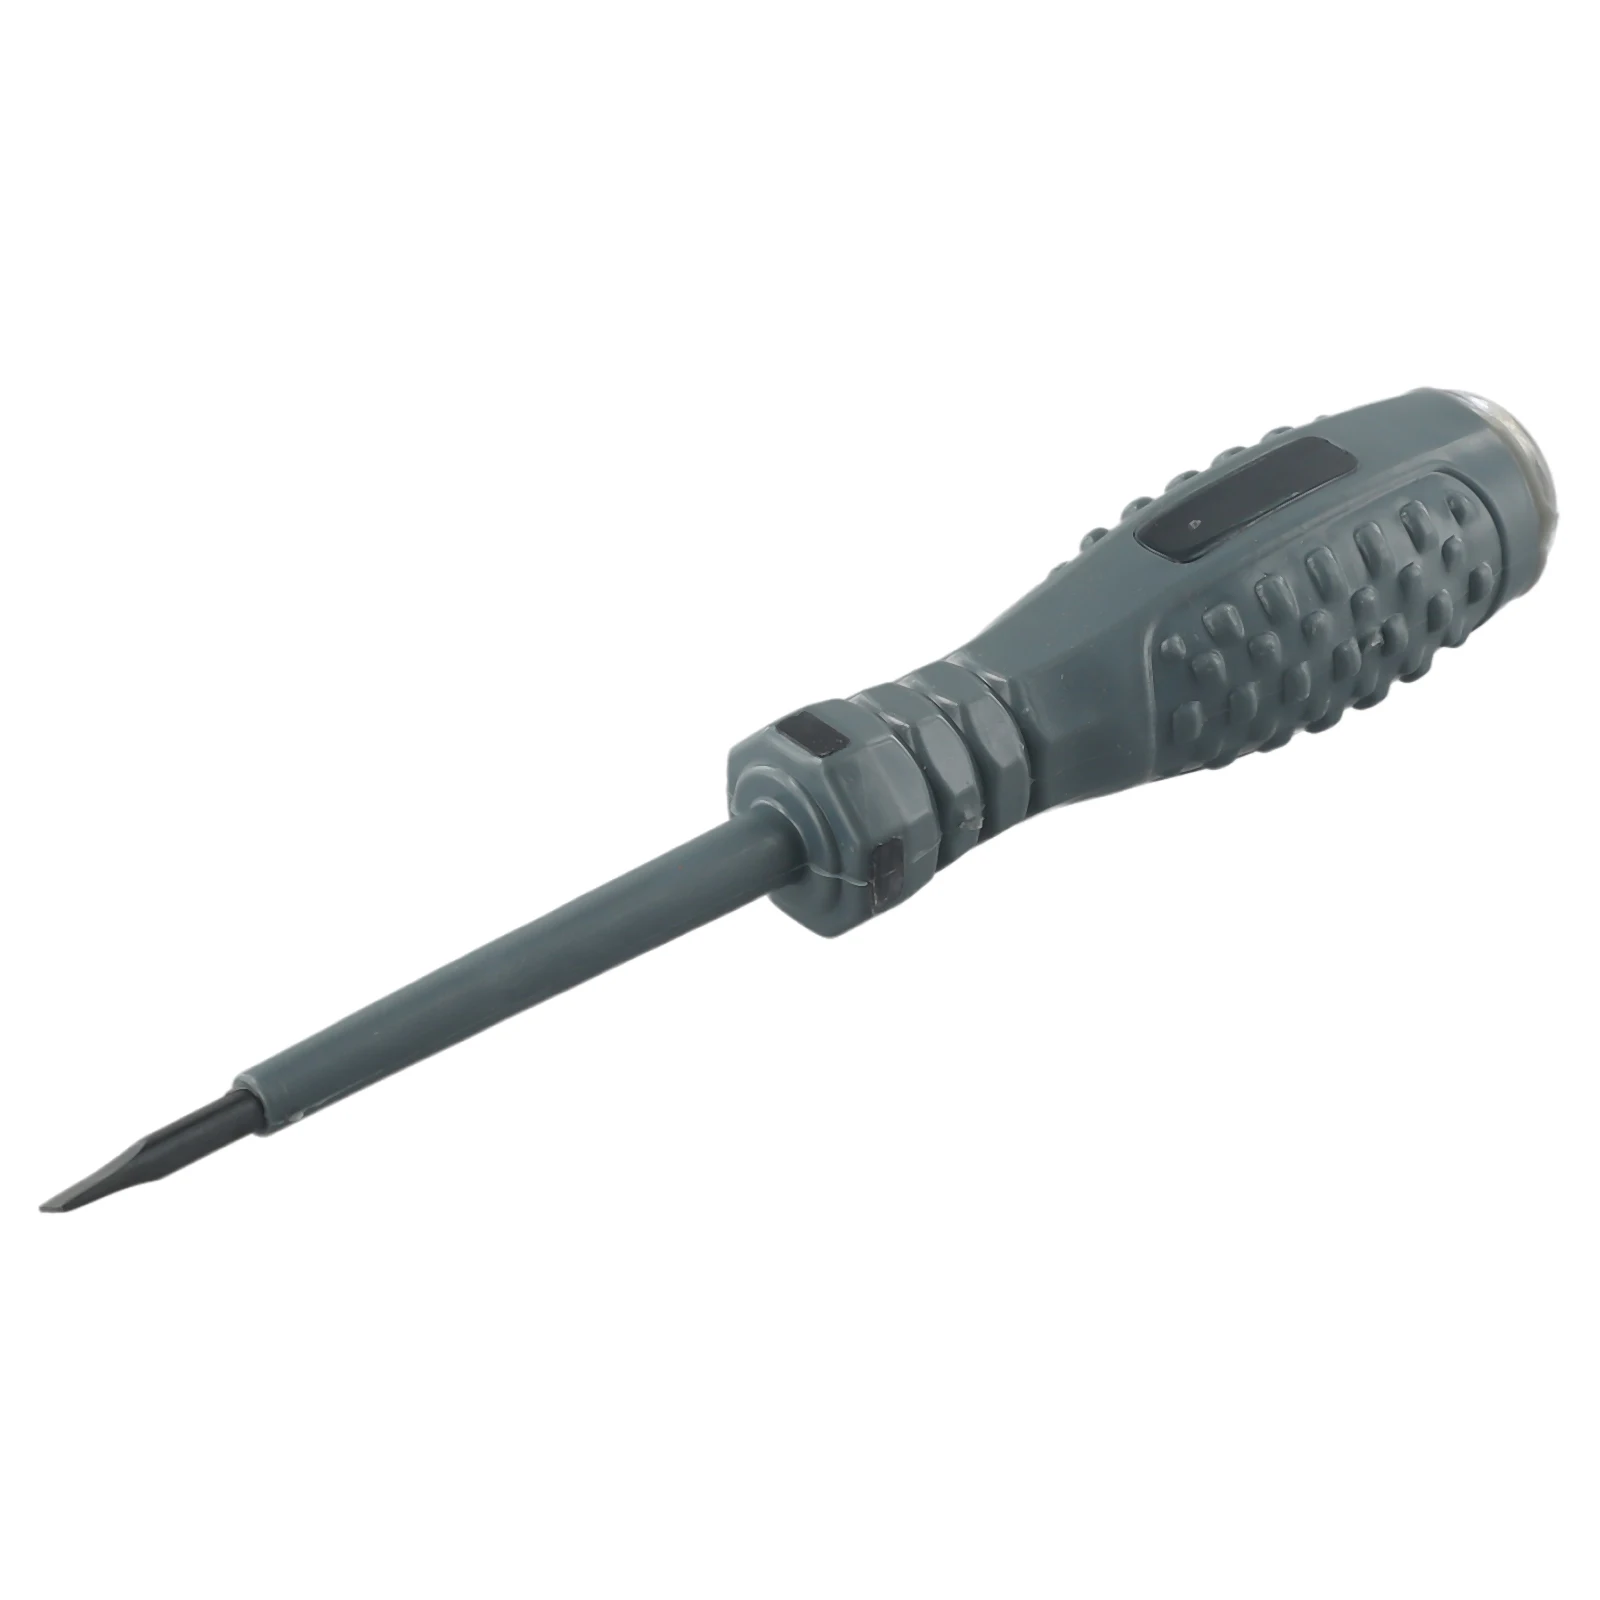 

Slotted/Cross Bit Electric Pencil Screwdriver Non Contact Electrical Measurement Neutral/Live Wire Identification